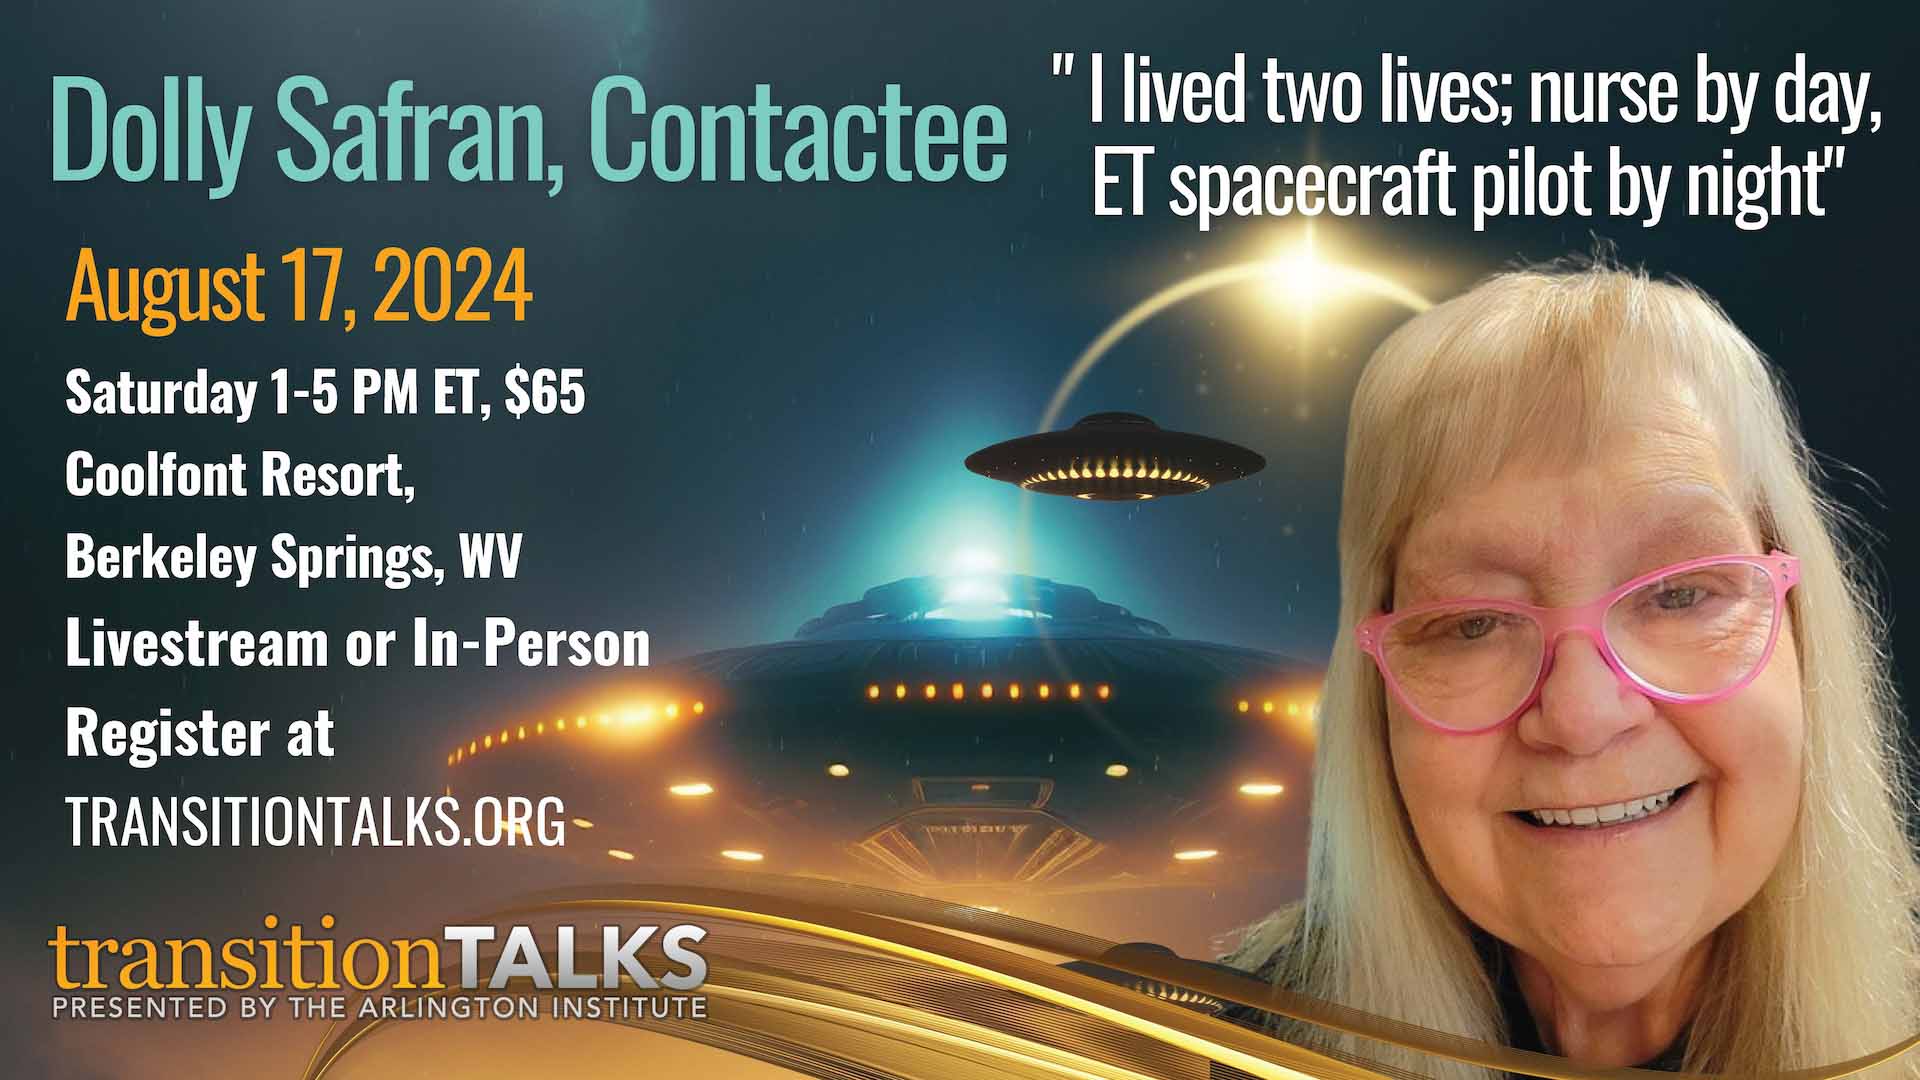 Dolly Safran is a fully conscious contactee since the age of fourteen, with full awareness of her extraterrestrial experiences.